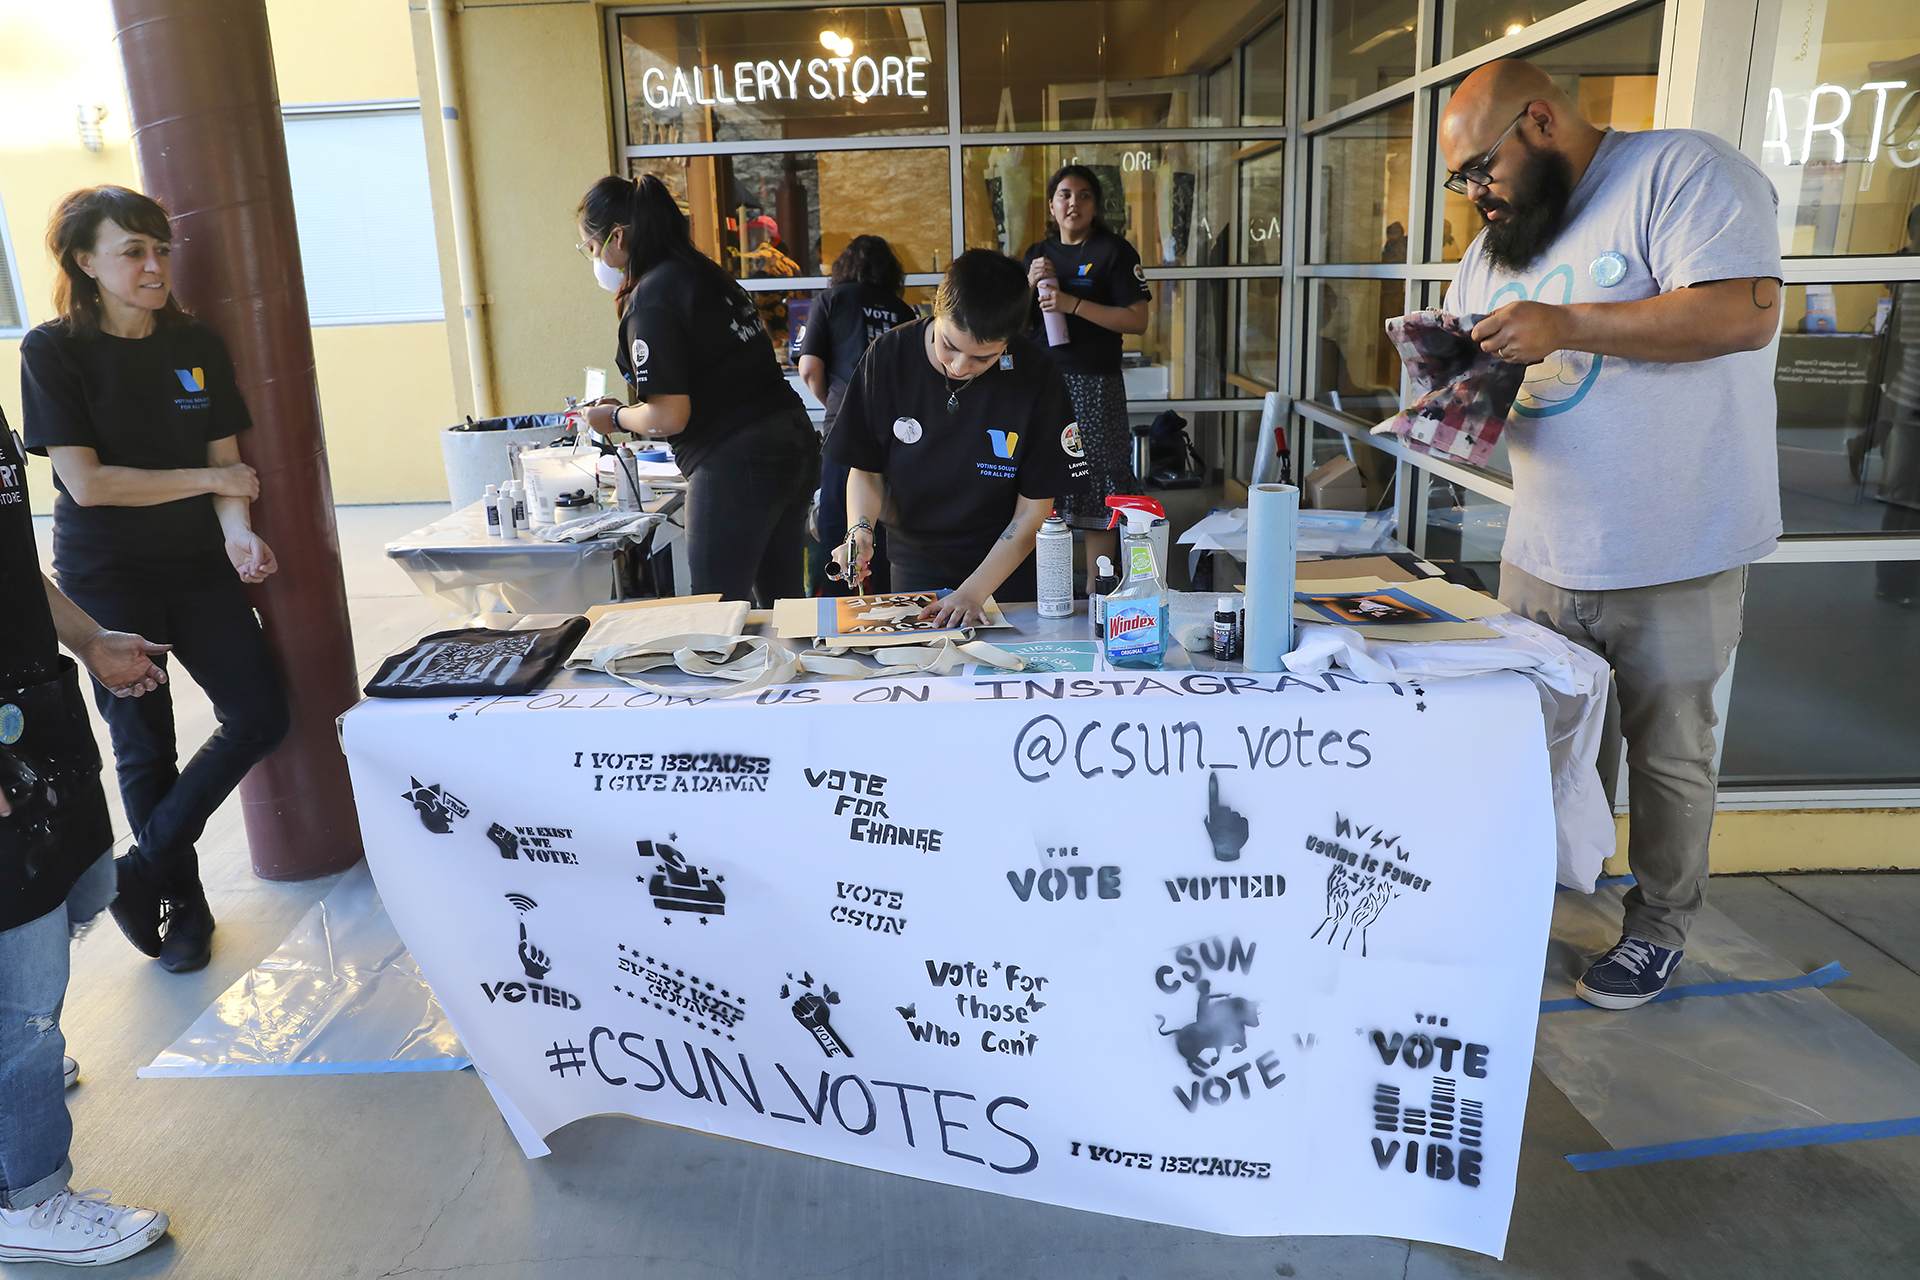 Creative Strategist-Artist in Residence engagement activity in collaboration with the Registrar Recorder supporting their new Voting Systems for all People held on the CSUN campus.